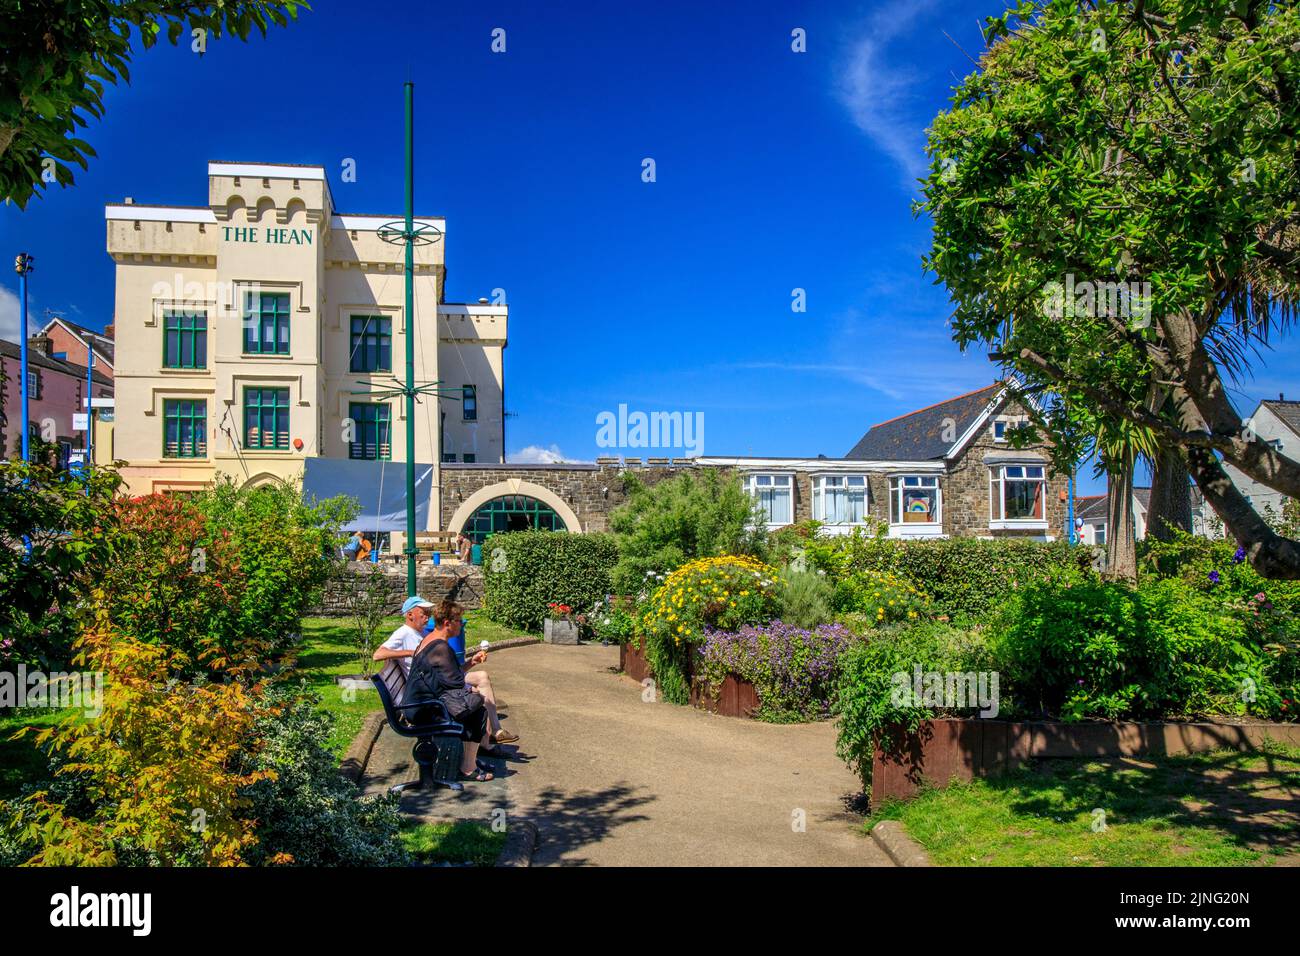 Saundersfoot has a sensory garden filled with colourful, tactile or perfumed plants in front of the Hean castle hotel, Pembrokeshire, Wales, UK Stock Photo